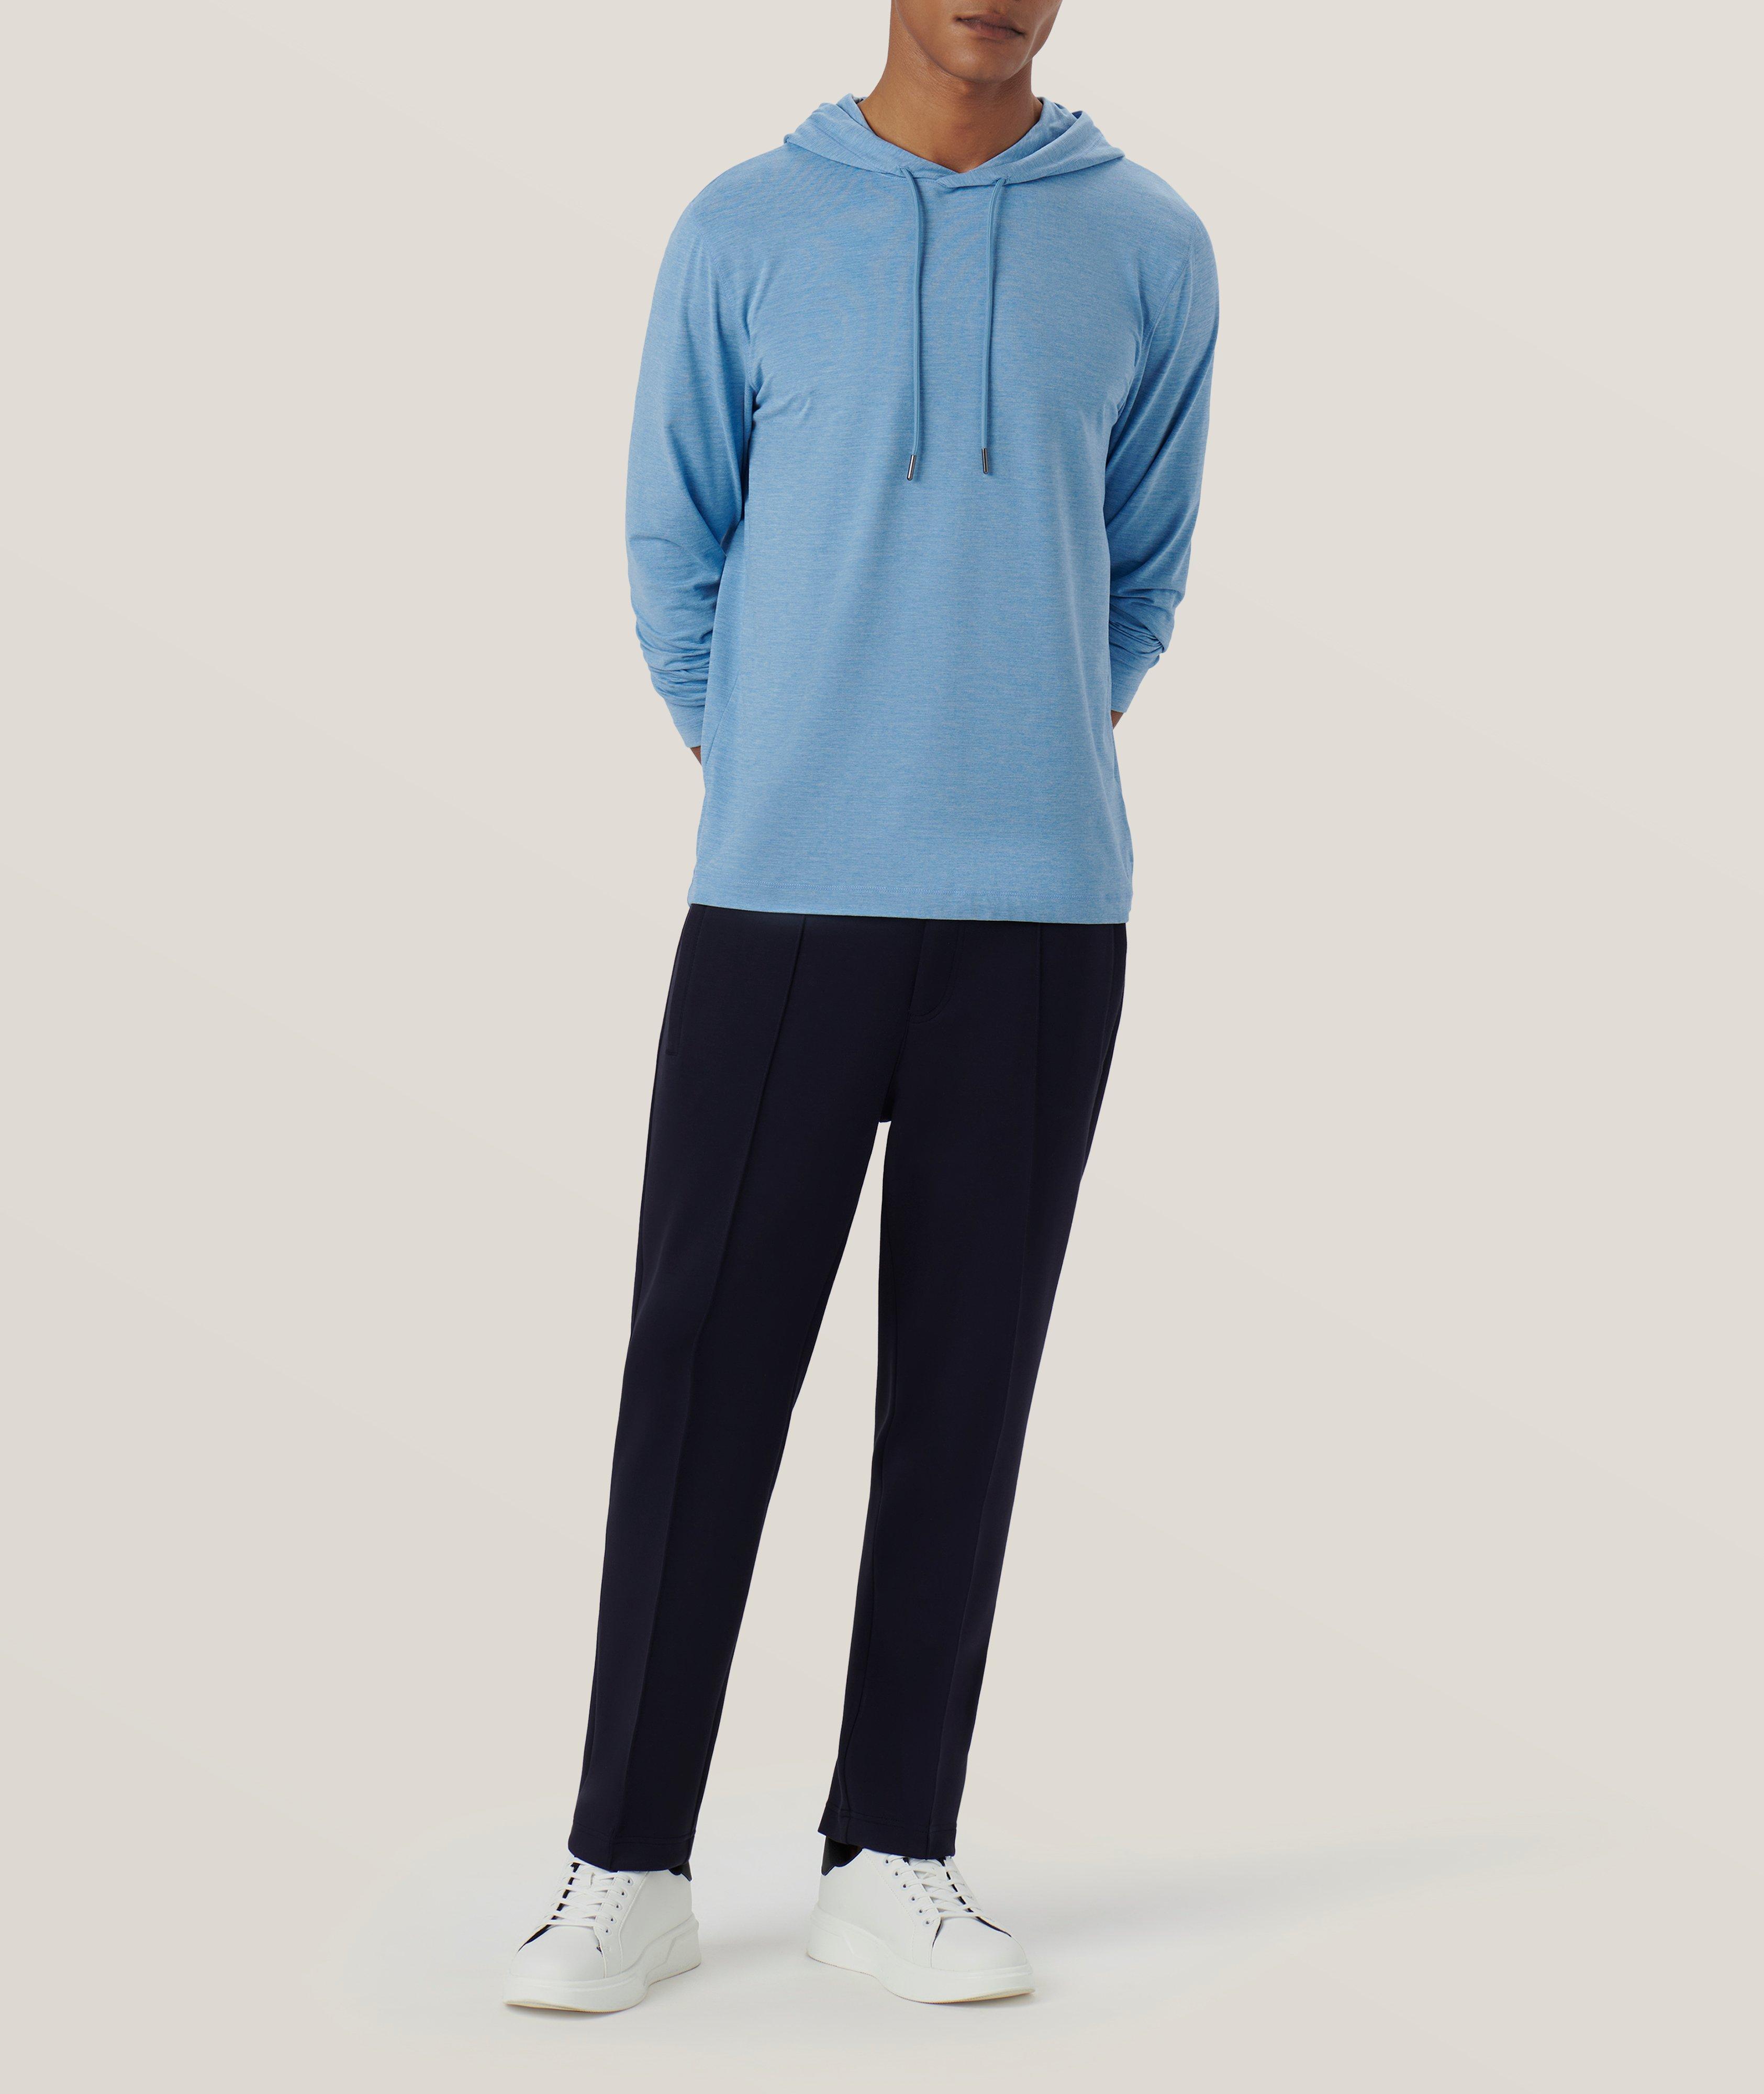 UV50 Performance Stretch-Fabric Hooded Sweater image 5